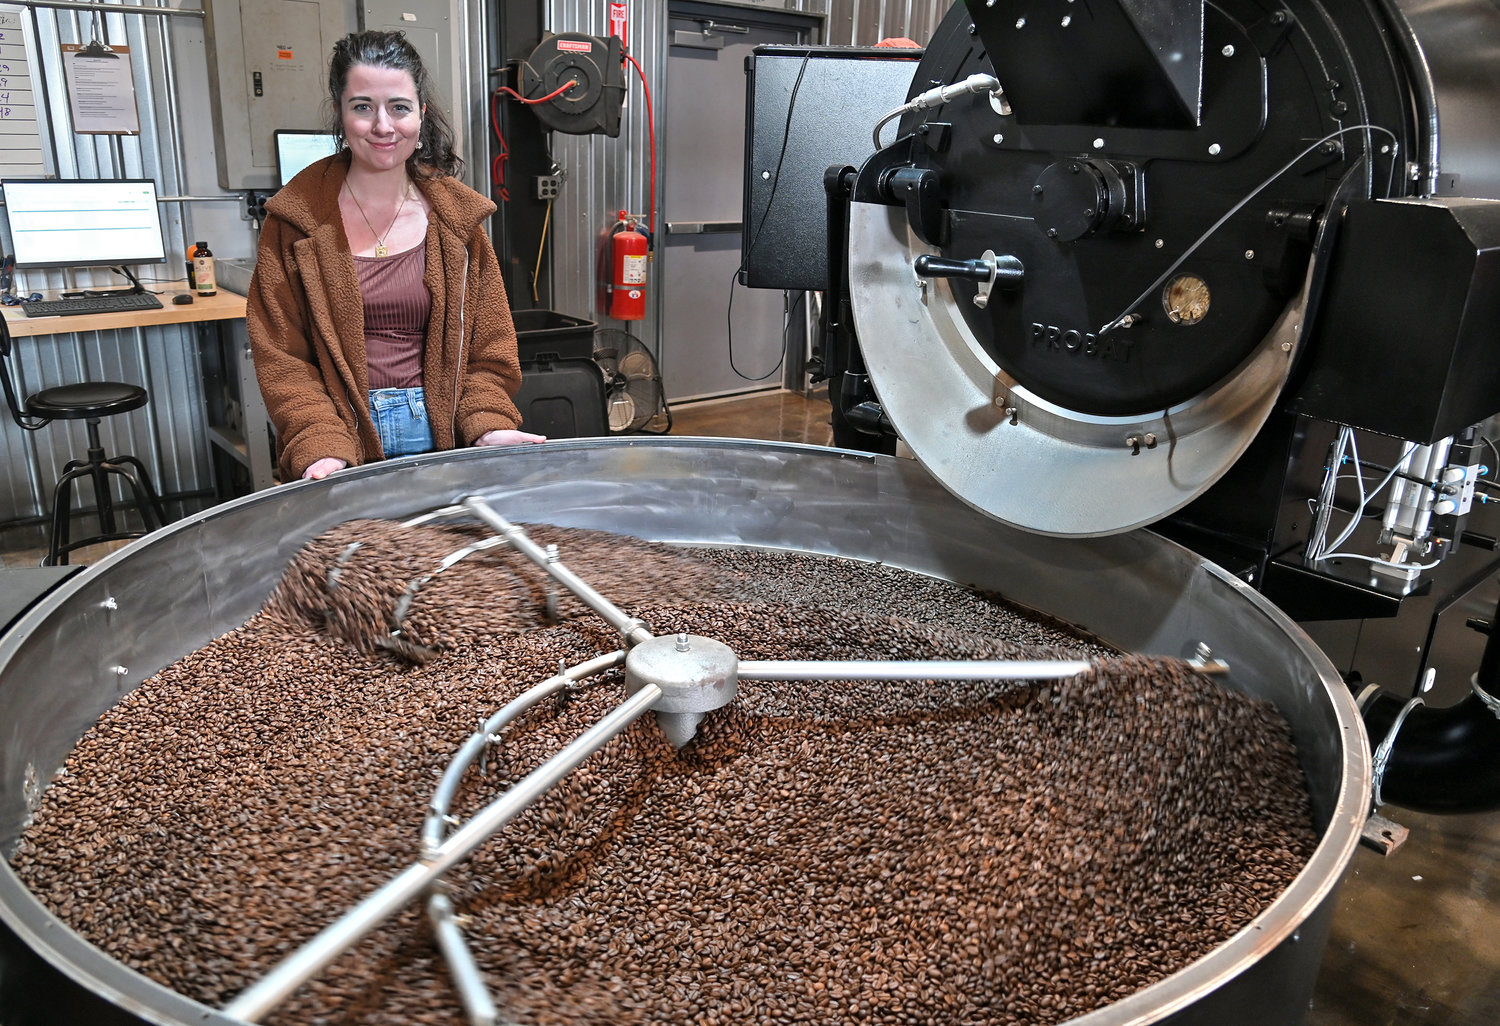 India Pachal at the cooling tray after coffee beans were roasted by the coffee roasting machine at Utica Coffee Roasting Inc. in Utica.